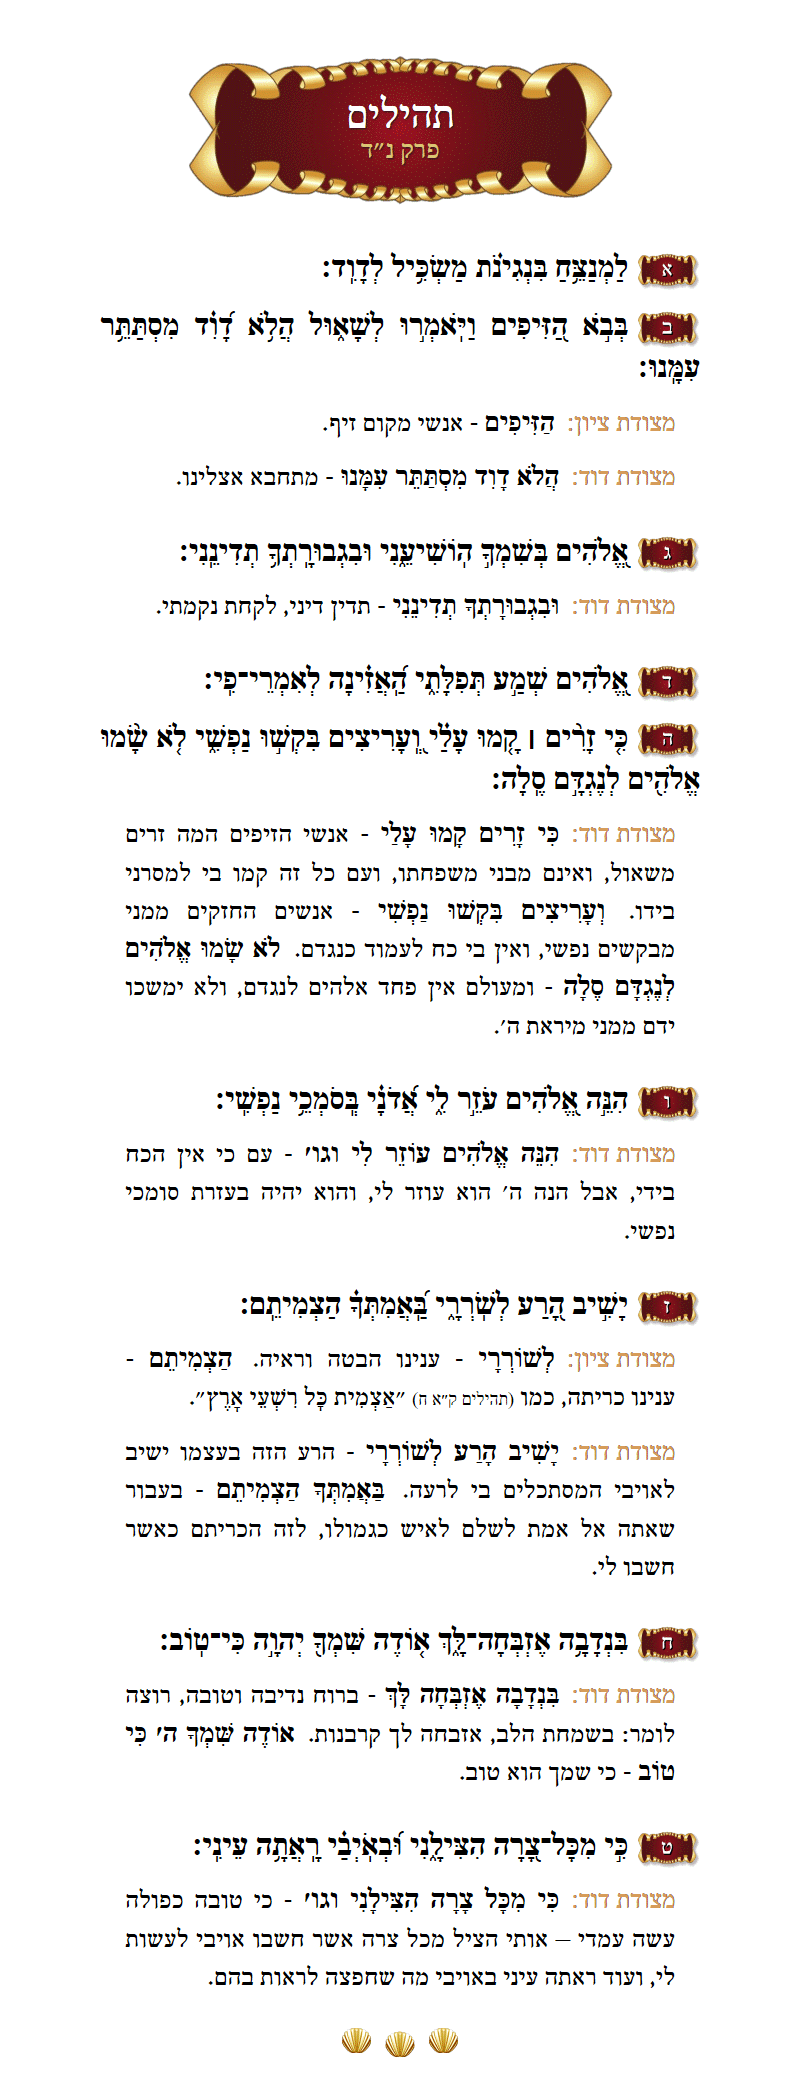 Sefer Tehillim Chapter 45 with commentary